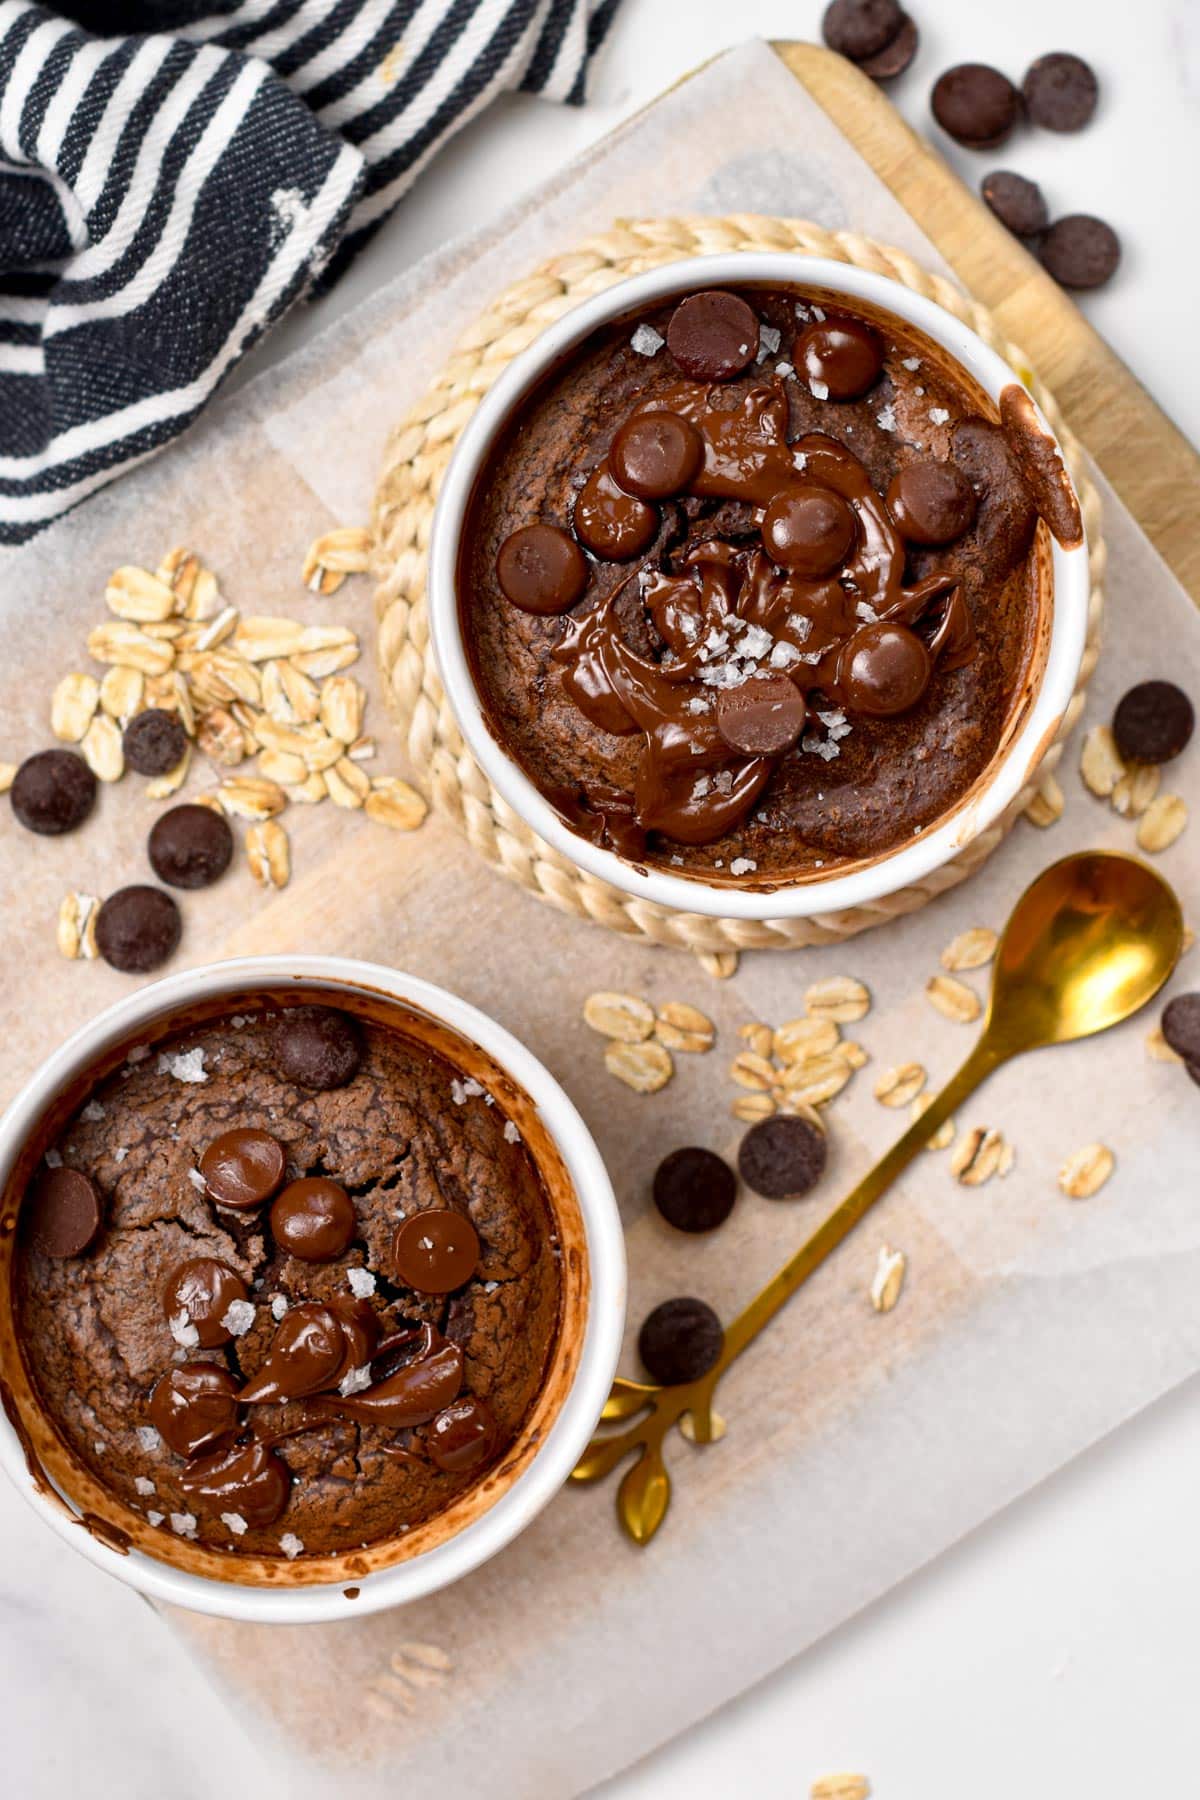 Chocolate Baked Oats served on two small ramekins, on a wooden board with a golden spoon.